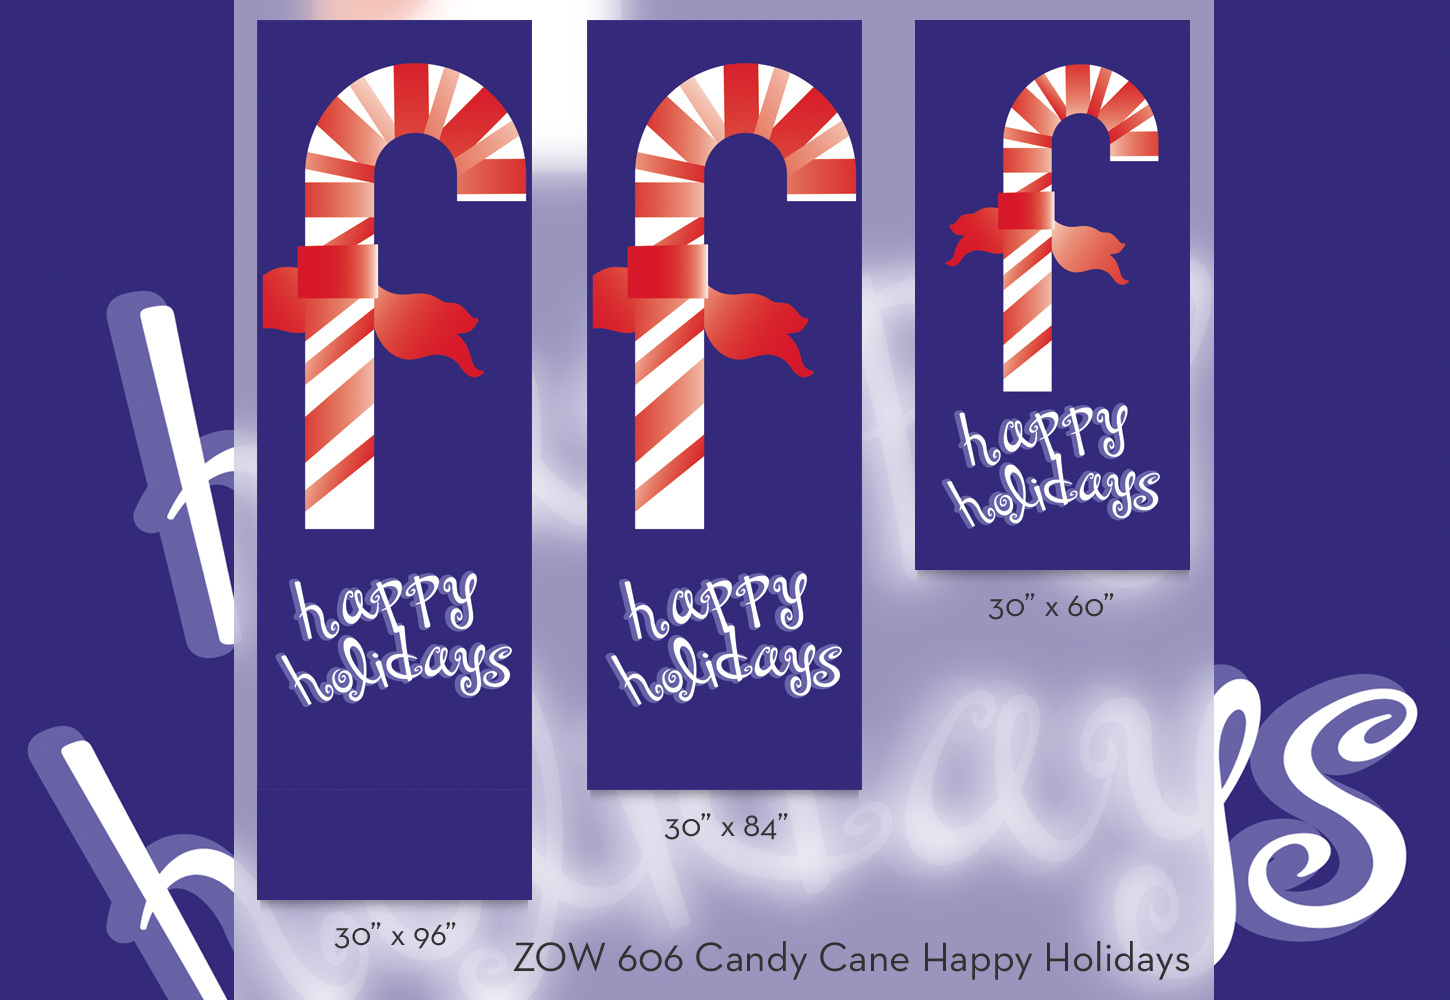 ZOW 606 Candy Cane Happy Holidays